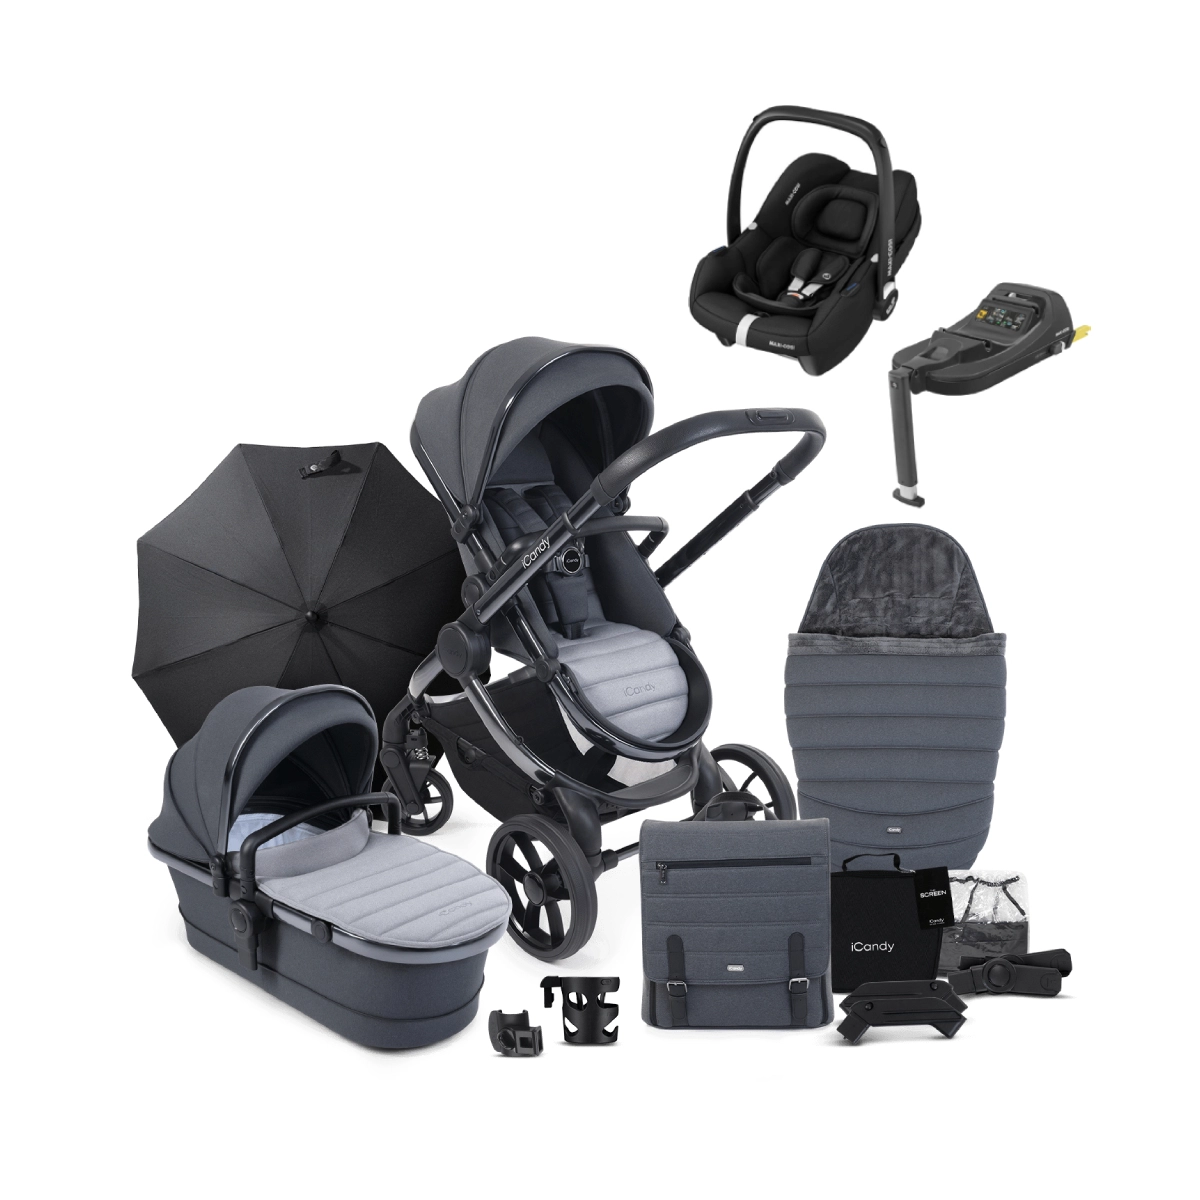 iCandy Peach 7 Maxi Cosi Cabriofix i-Size Complete Travel System Bundle